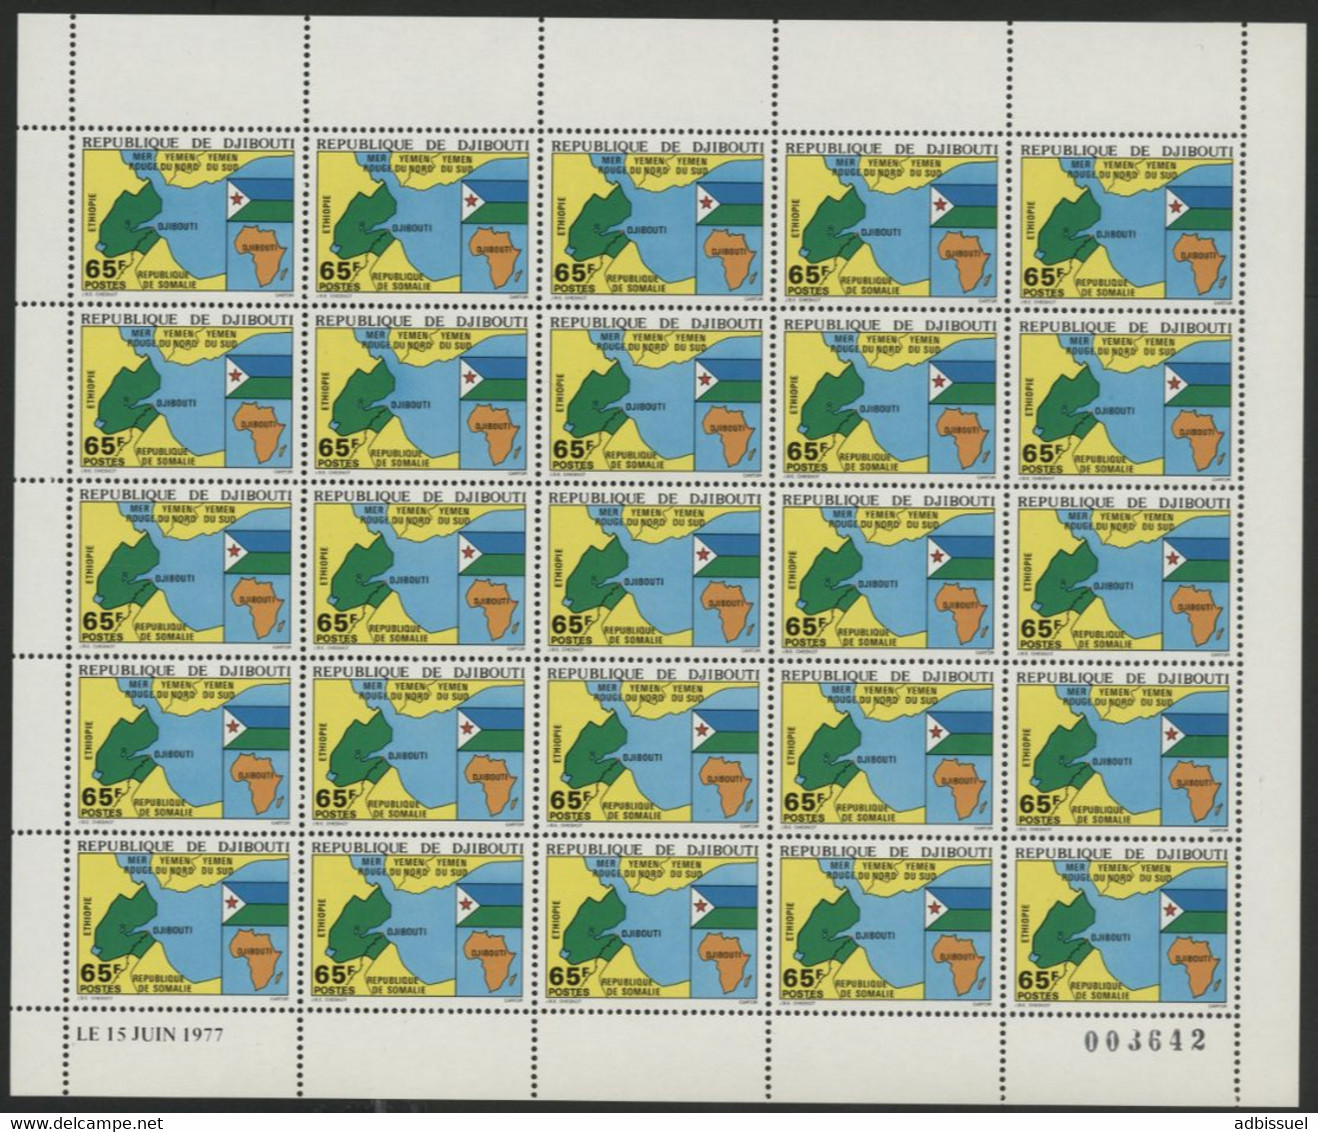 DJIBOUTI N° 459 COTE 50 € FEUILLE COMPLETE DE 25 EXEMPLAIRES NEUFS MNH ** INDEPENDANCE.  TB - Geographie